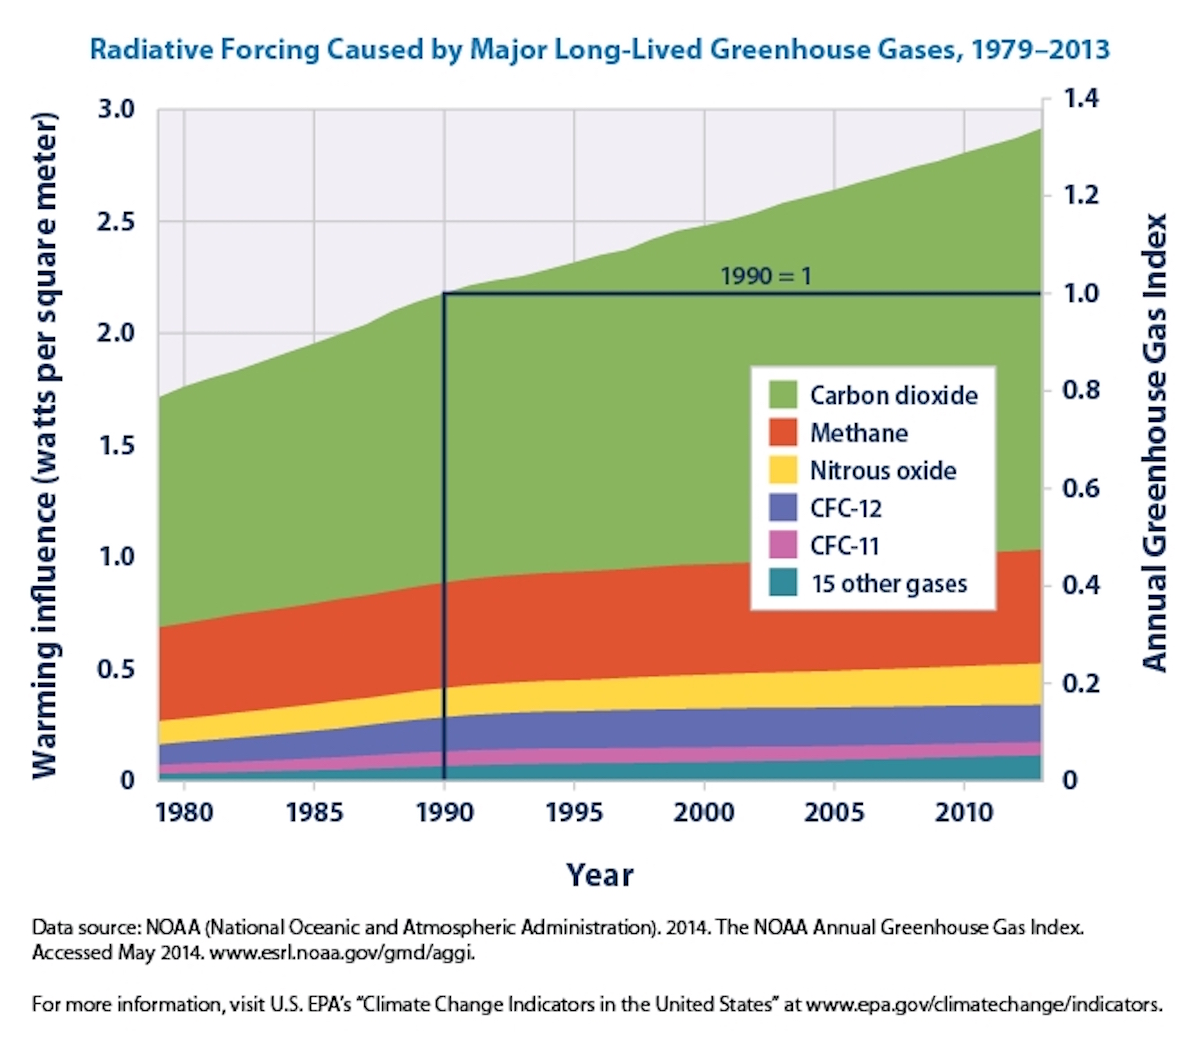 radiative-forcing-caused-by-greenhouse-gases-graph.jpeg